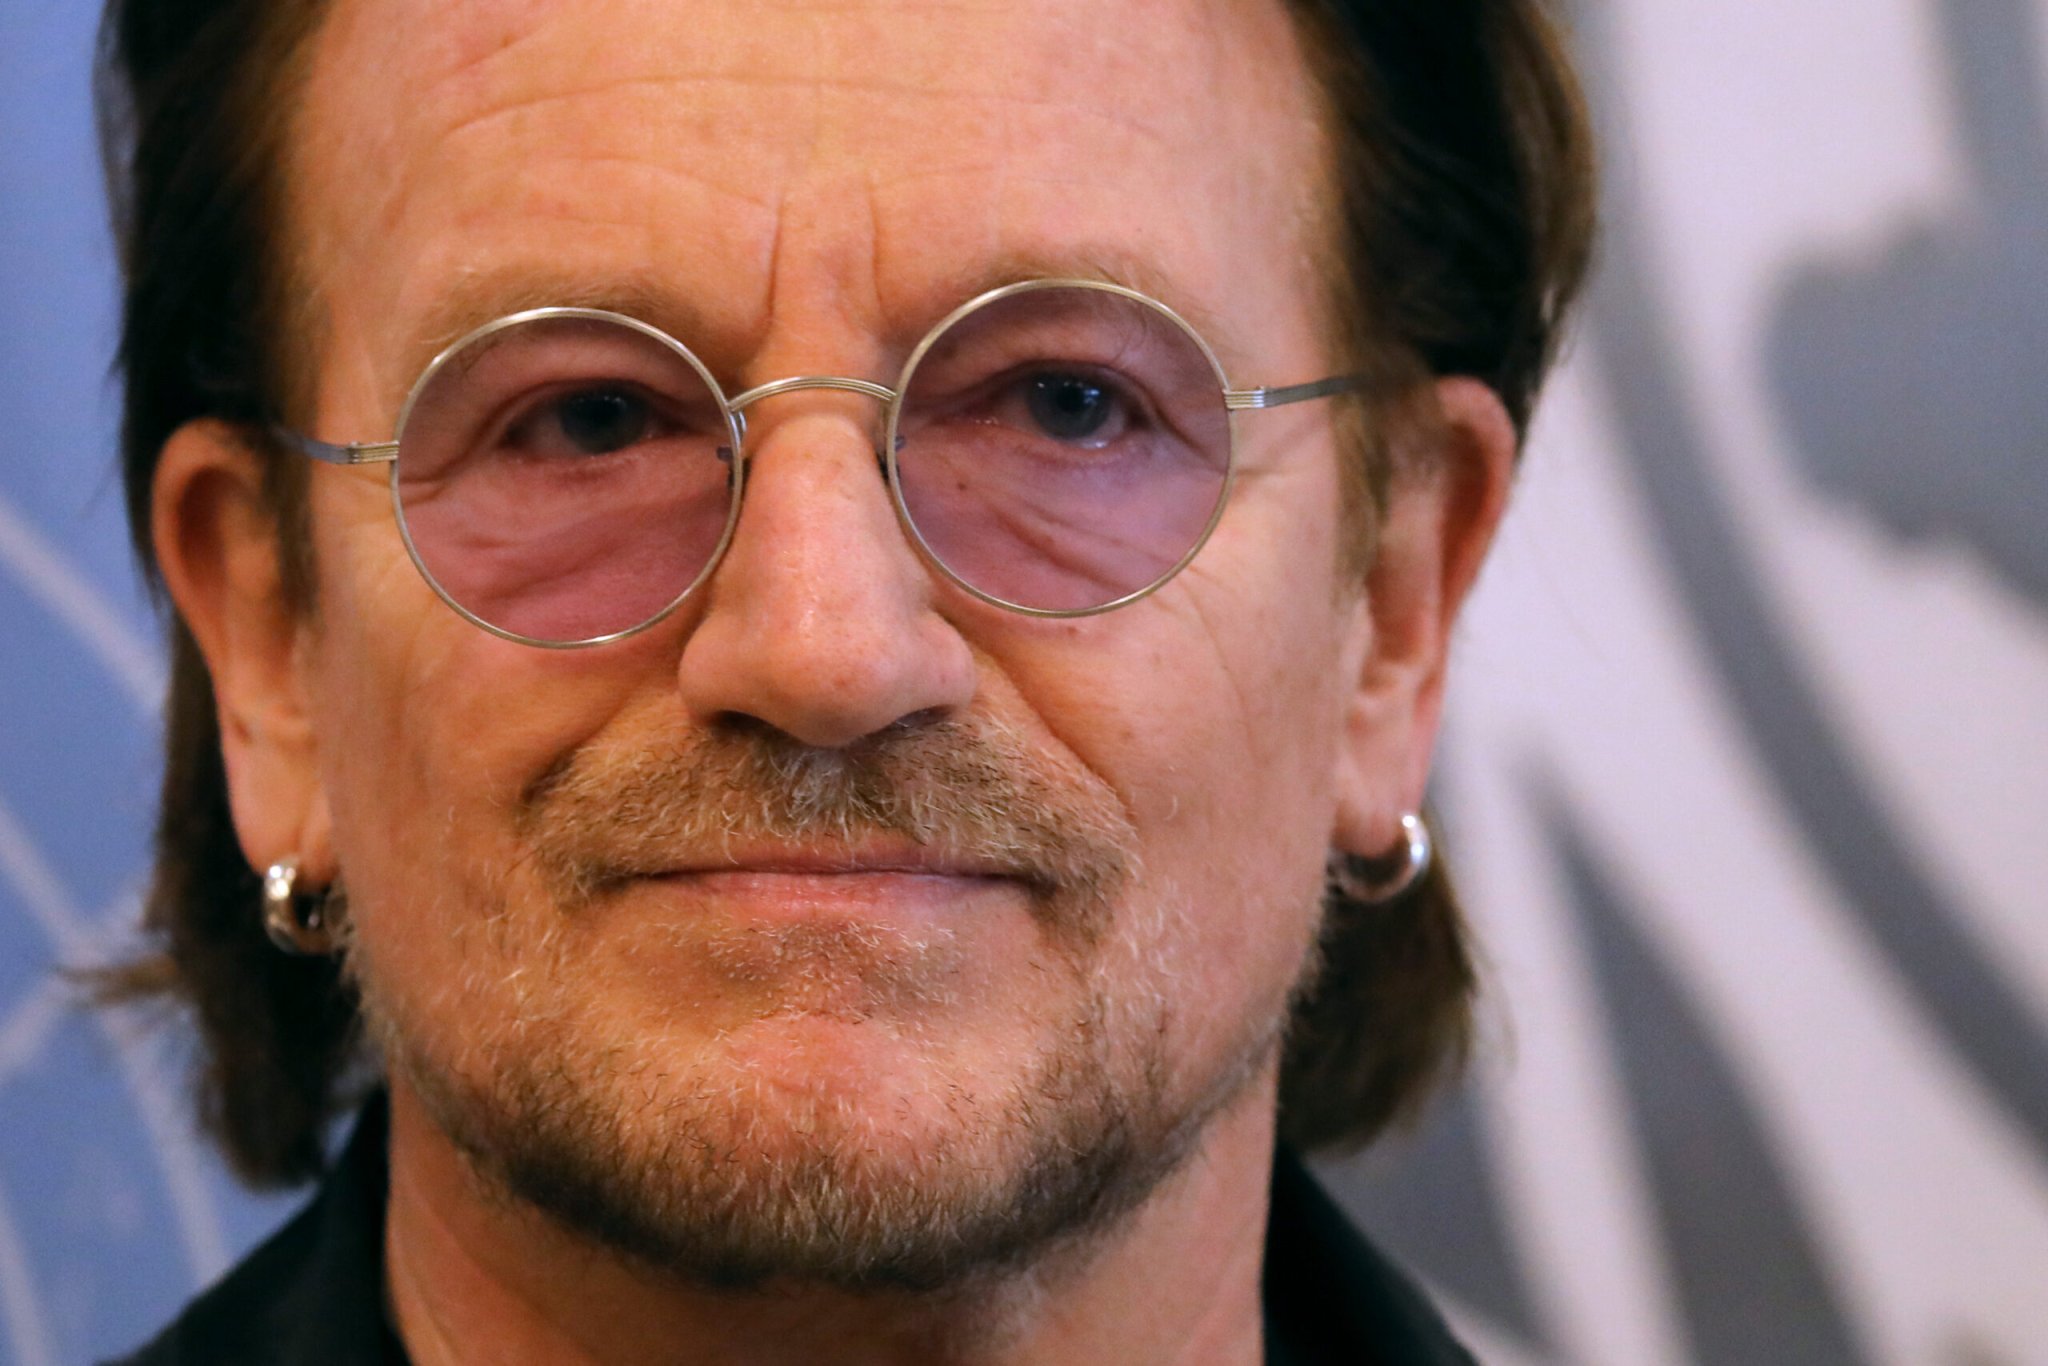 Bono Says He is Embarrassed by His Own Singing Voice and 'Still' Dislikes U2's Band Name